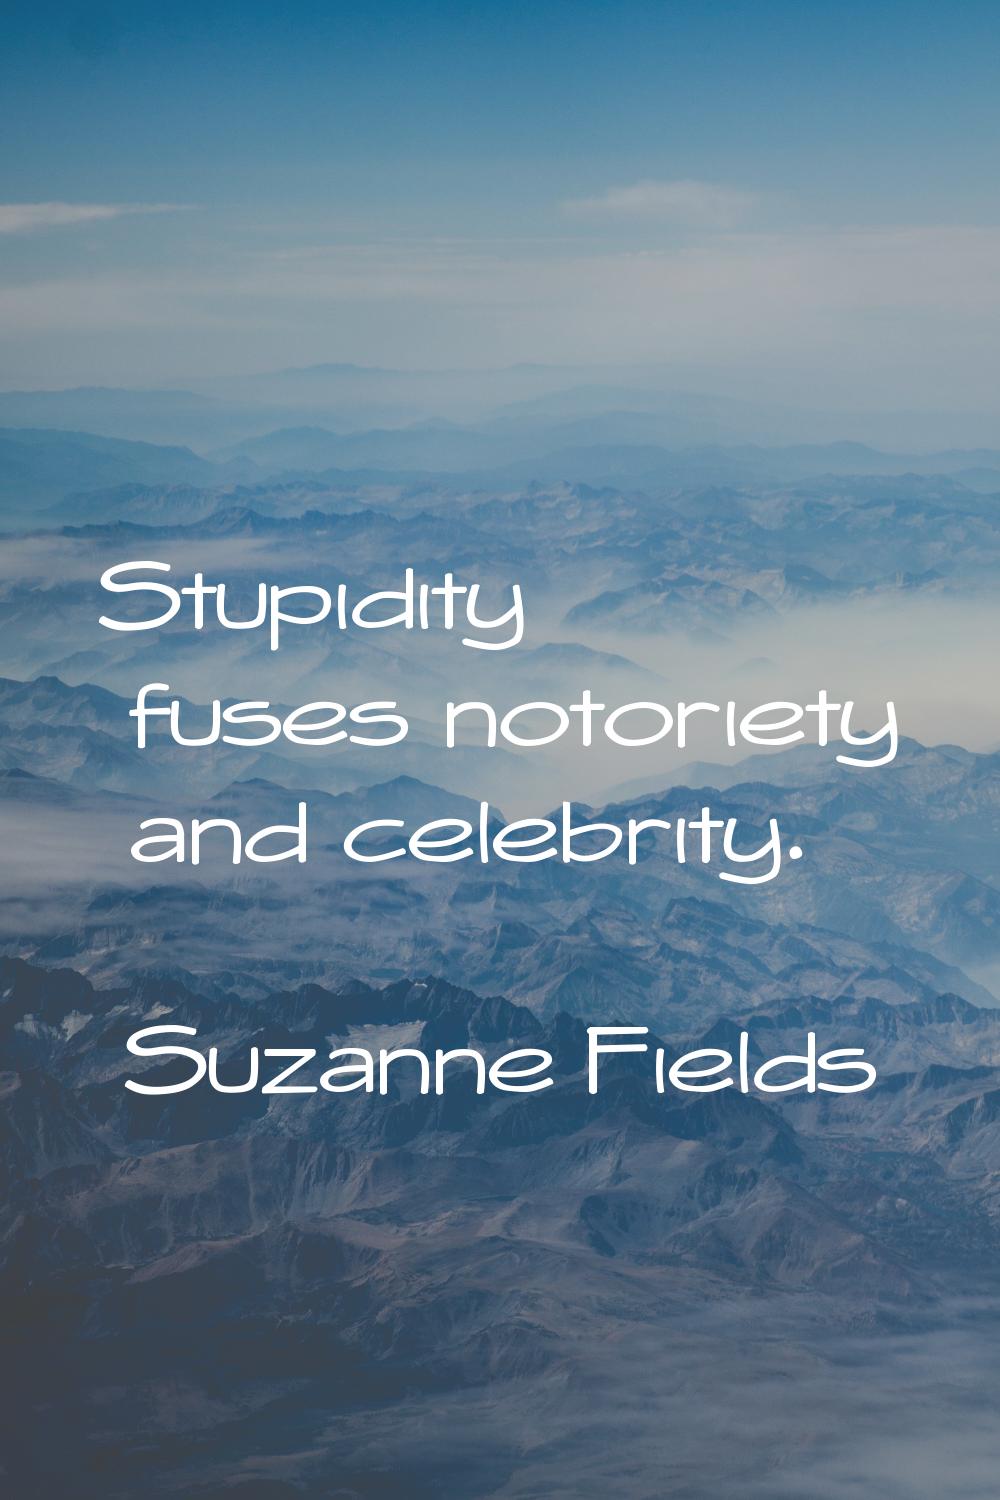 Stupidity fuses notoriety and celebrity.